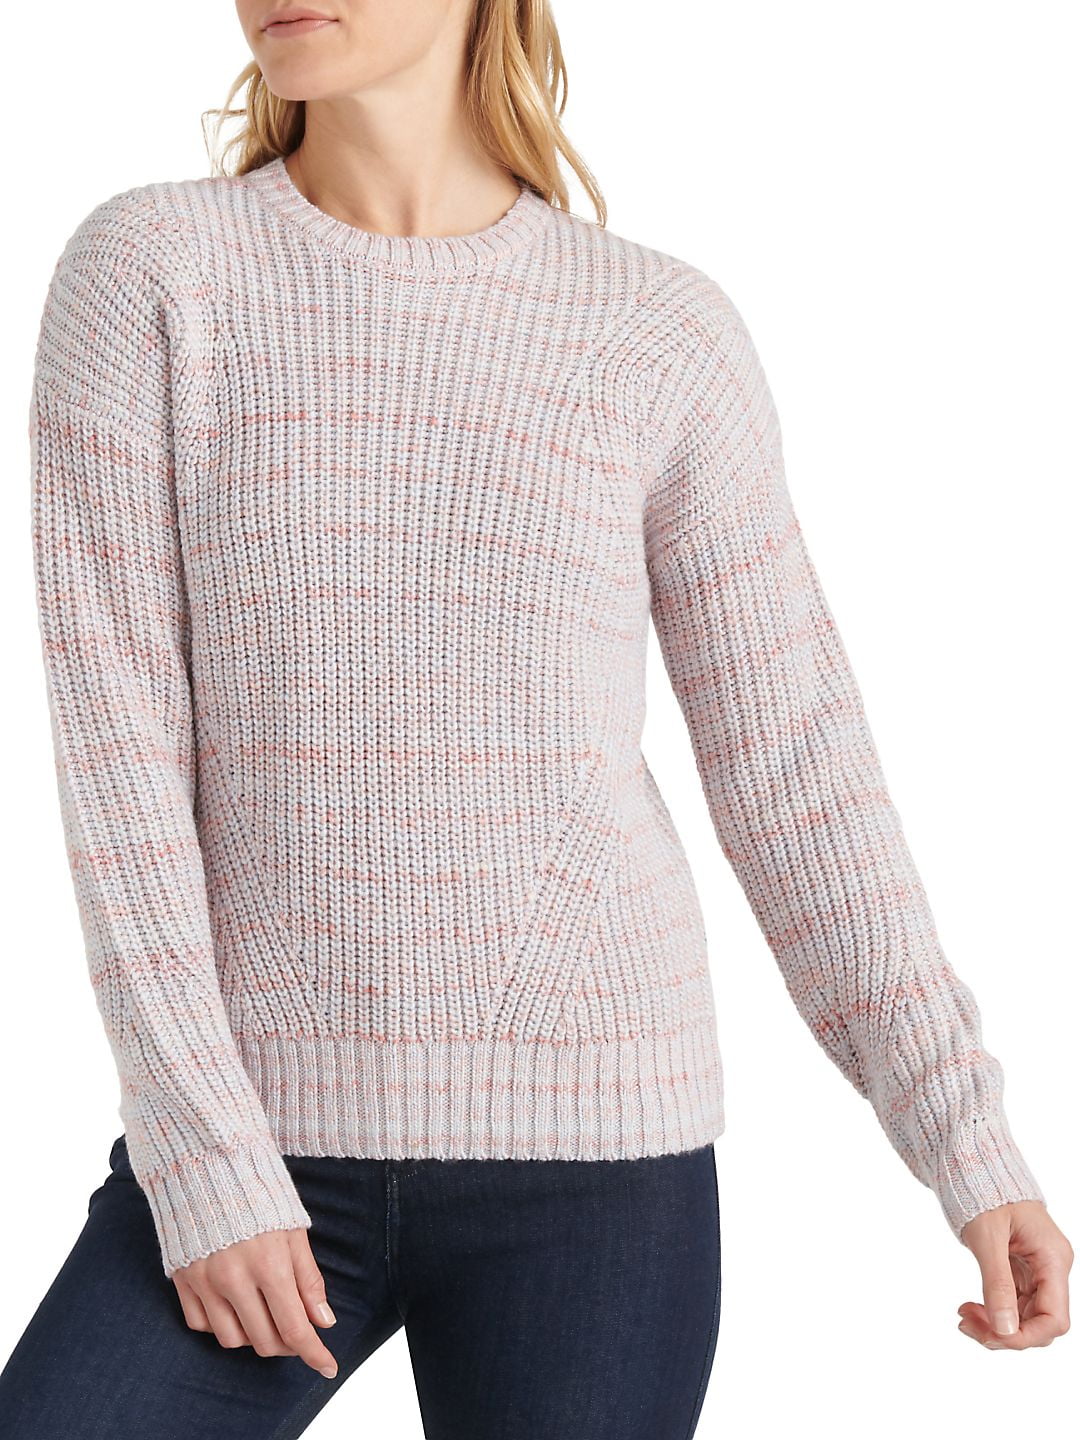 Lucky Brand Cable Knit Pullover Crewneck Women's Sweater Size L